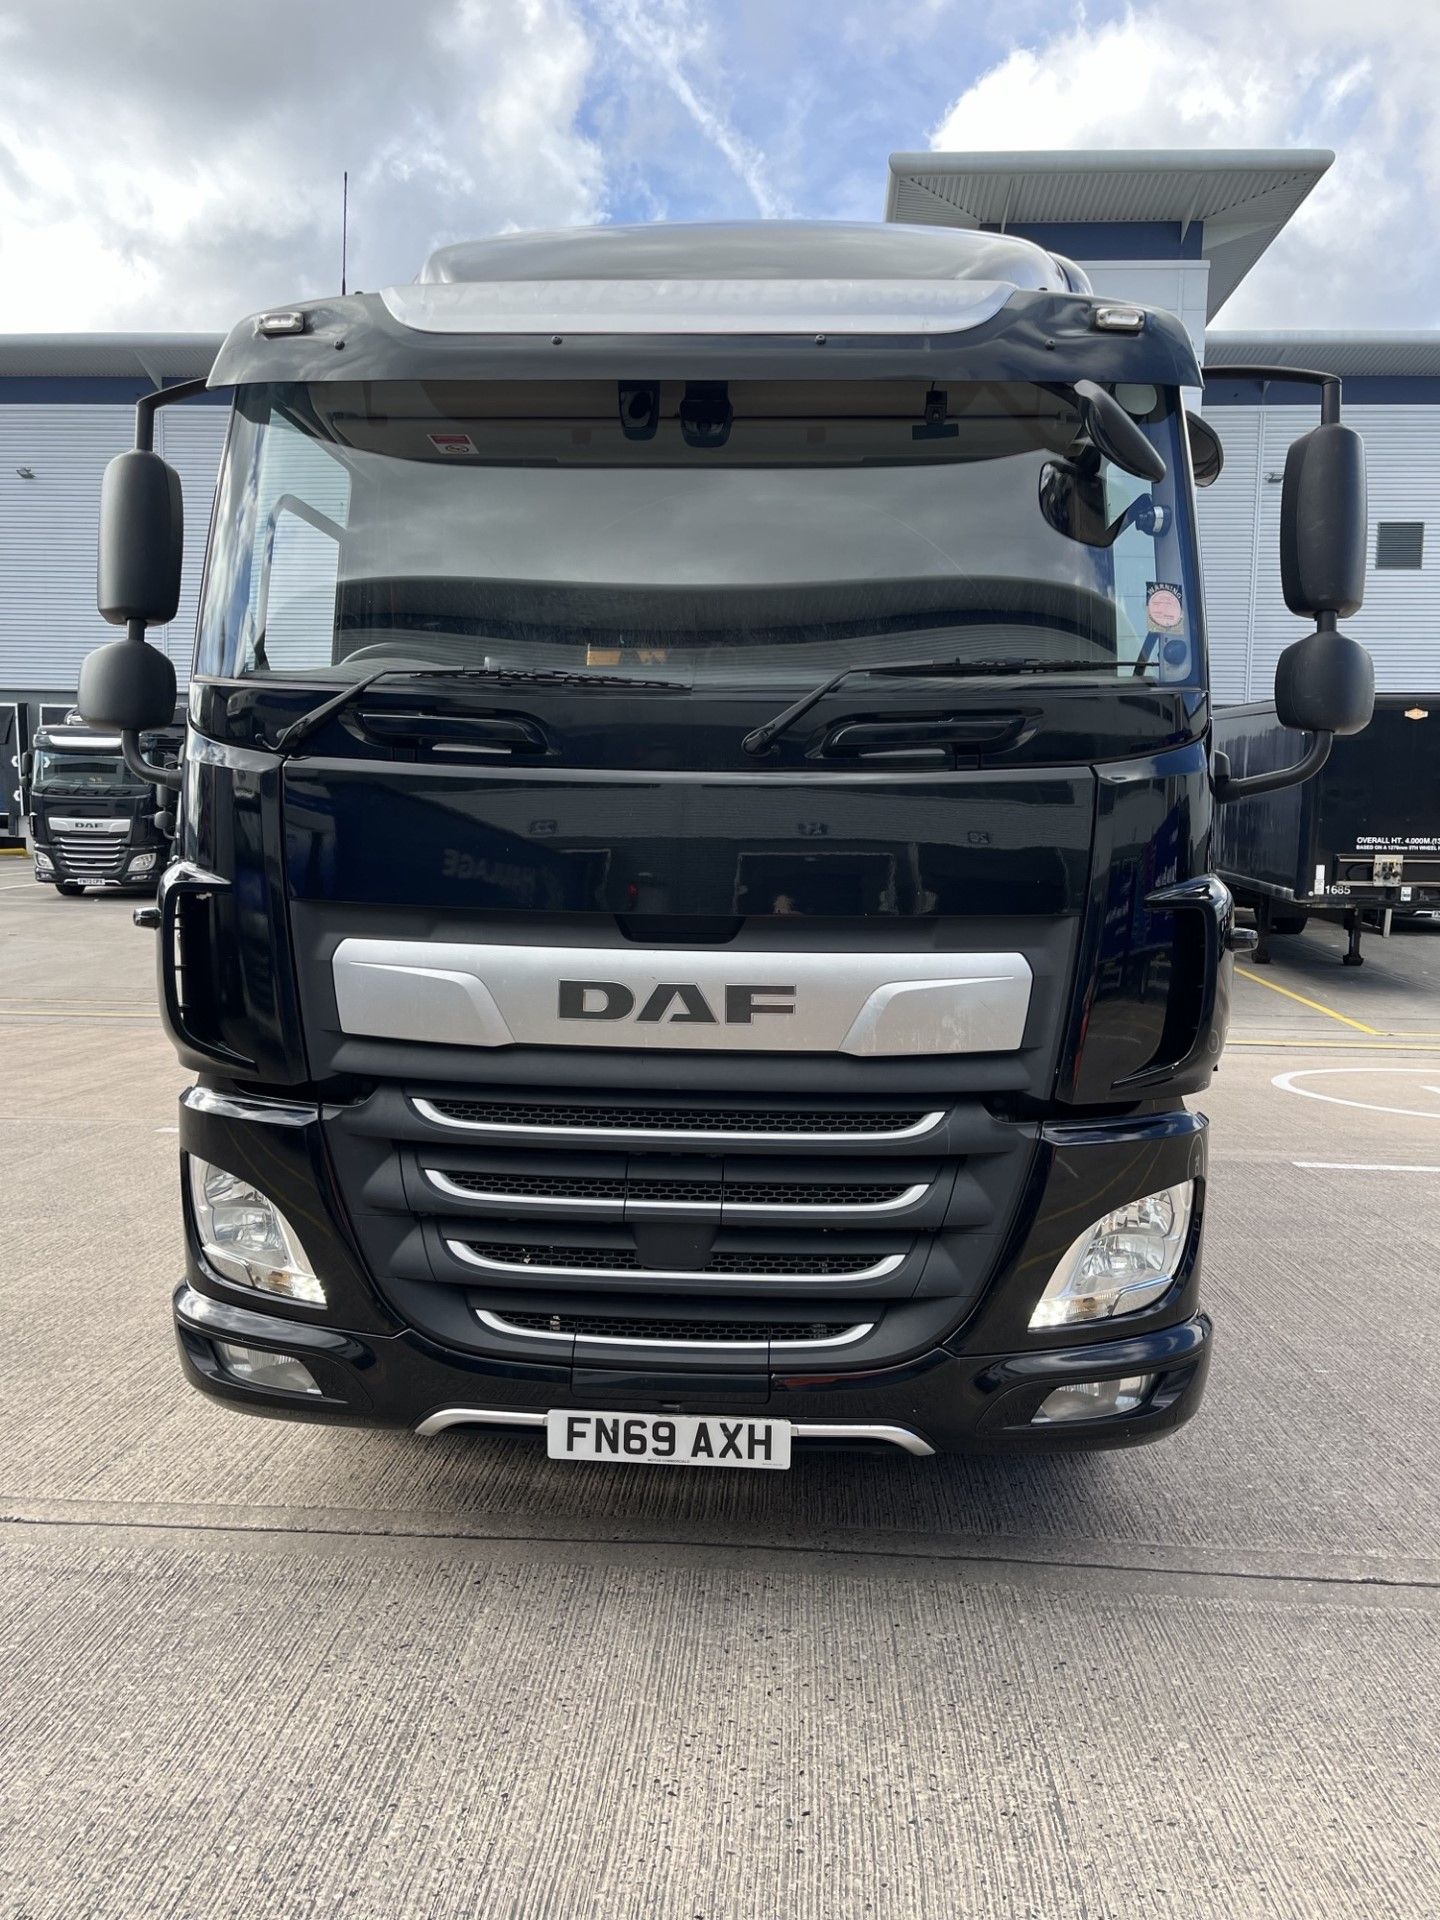 2019, DAF CF 260 FA - FN69 AXH (18 Ton Rigid Truck with Tail Lift) - Image 4 of 22